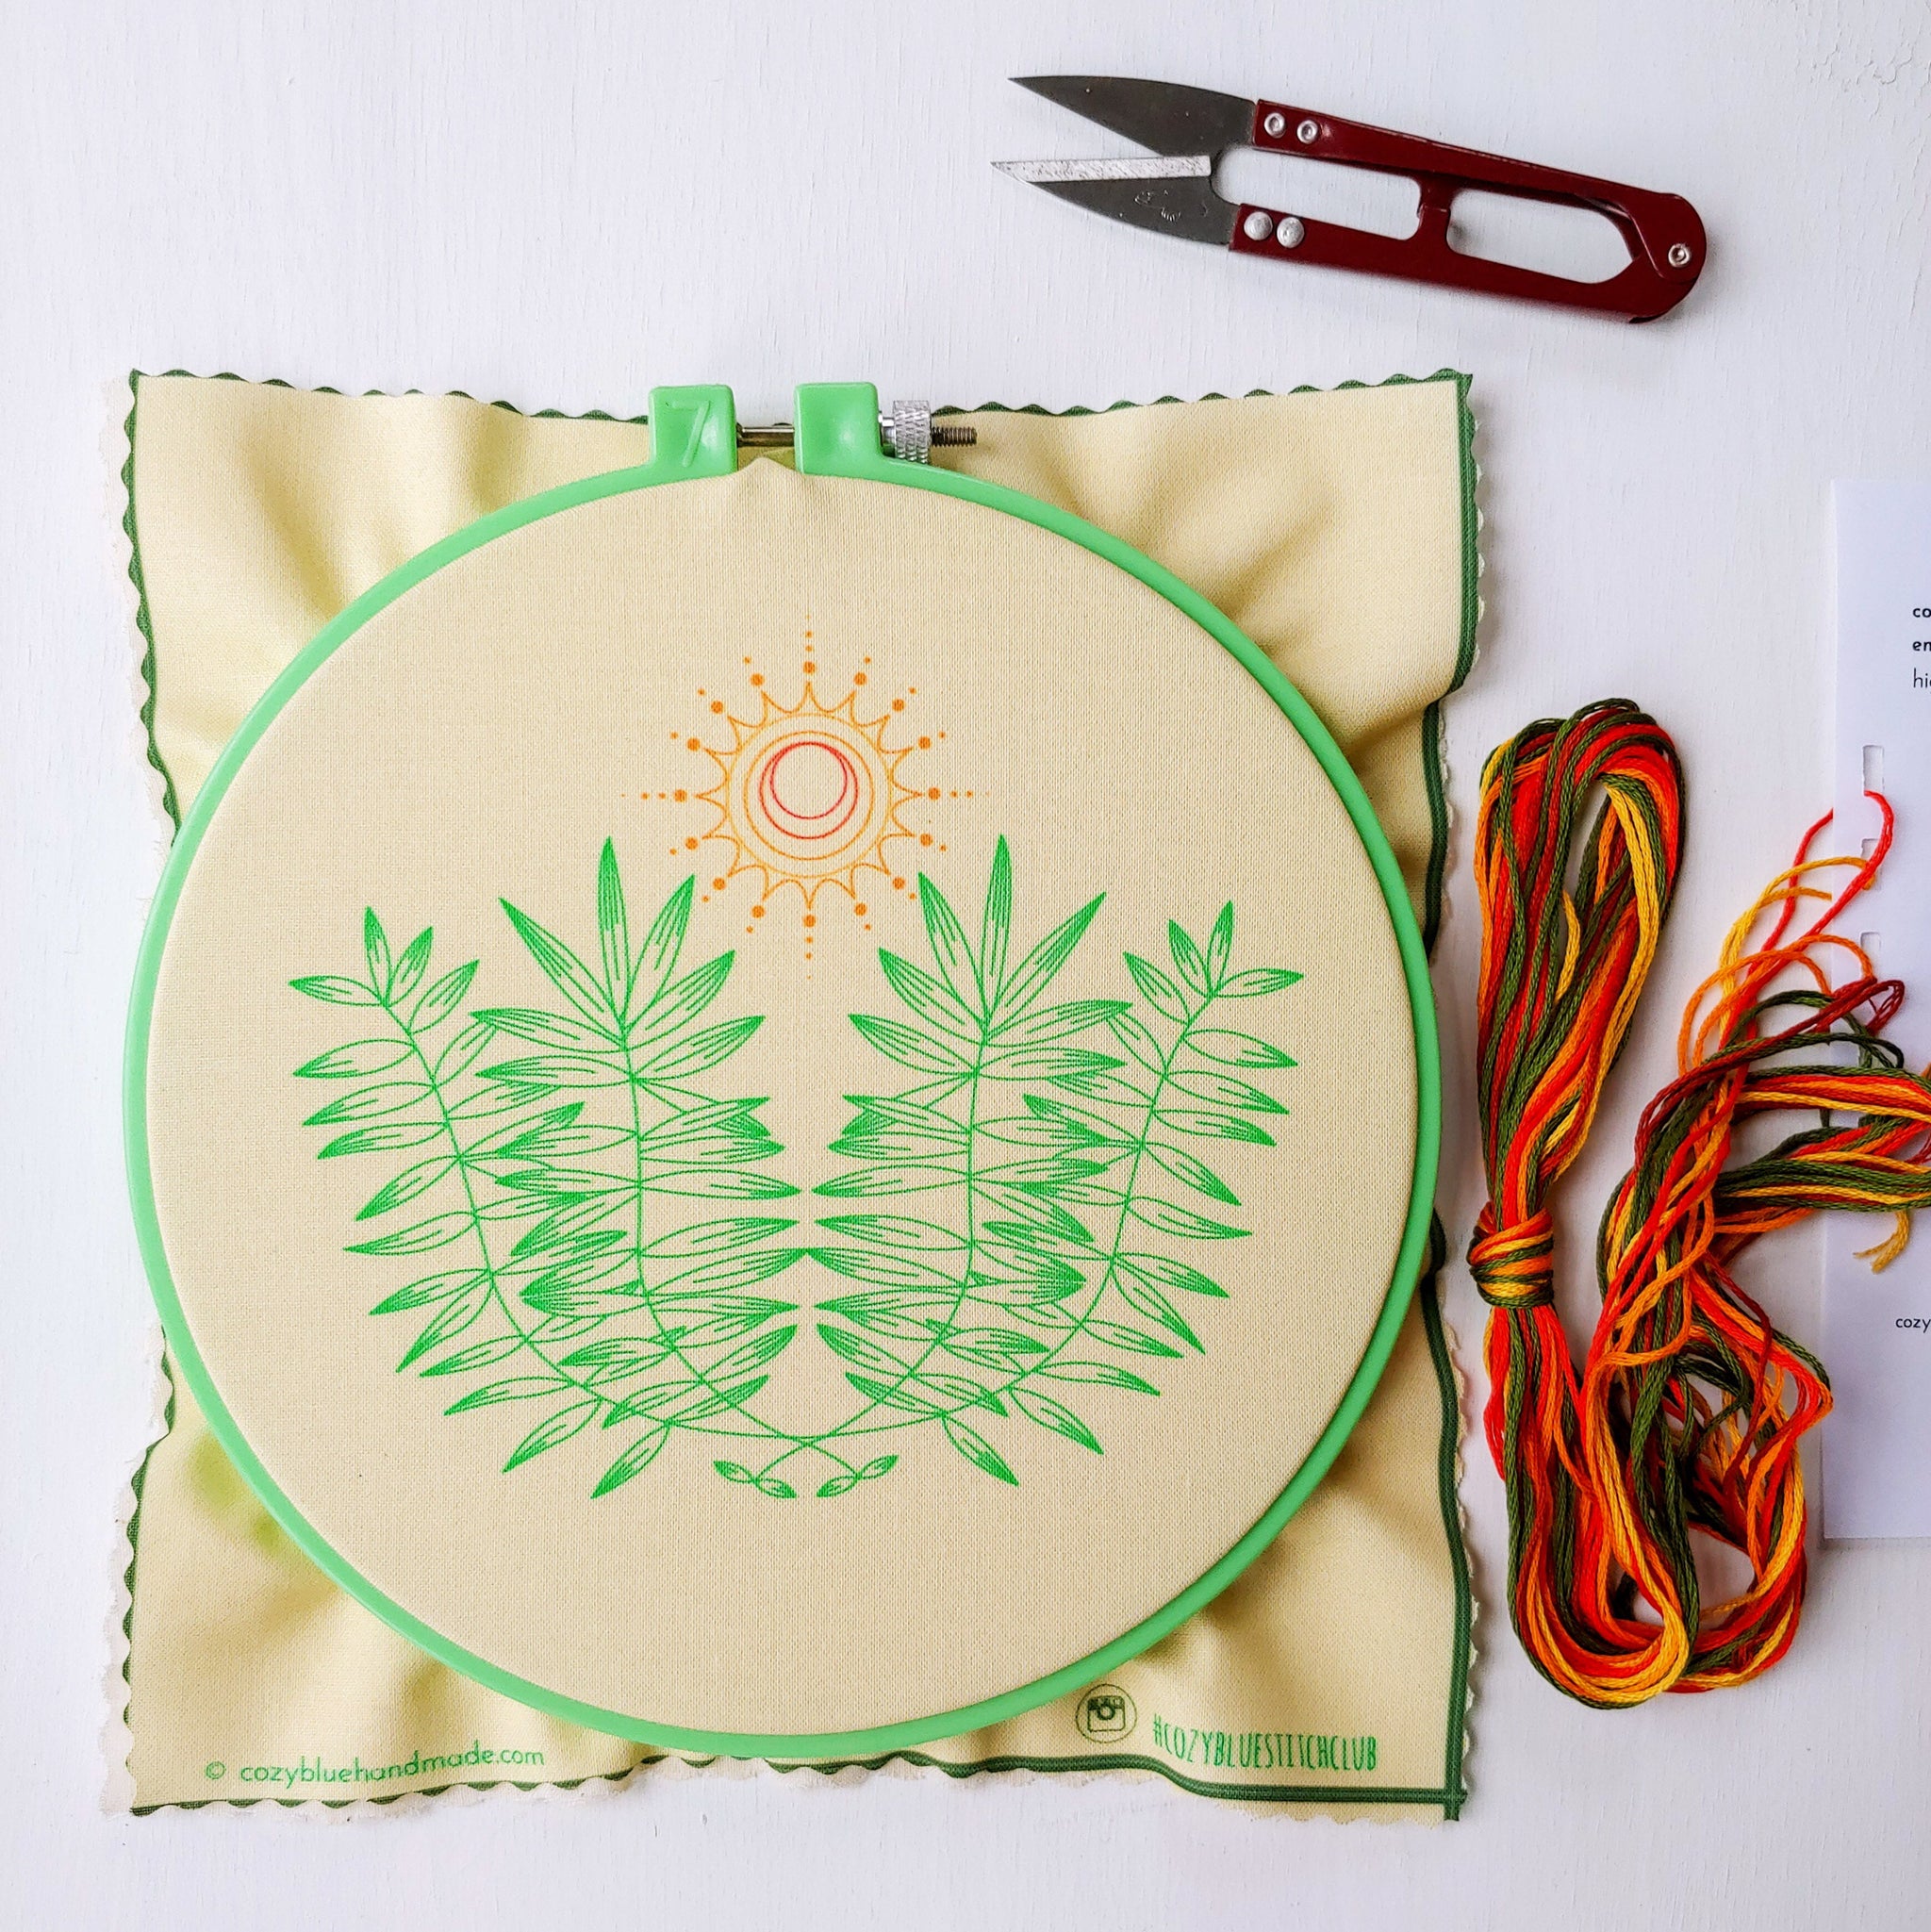 stitches in the round embroidery kit [last chance!] – cozyblue